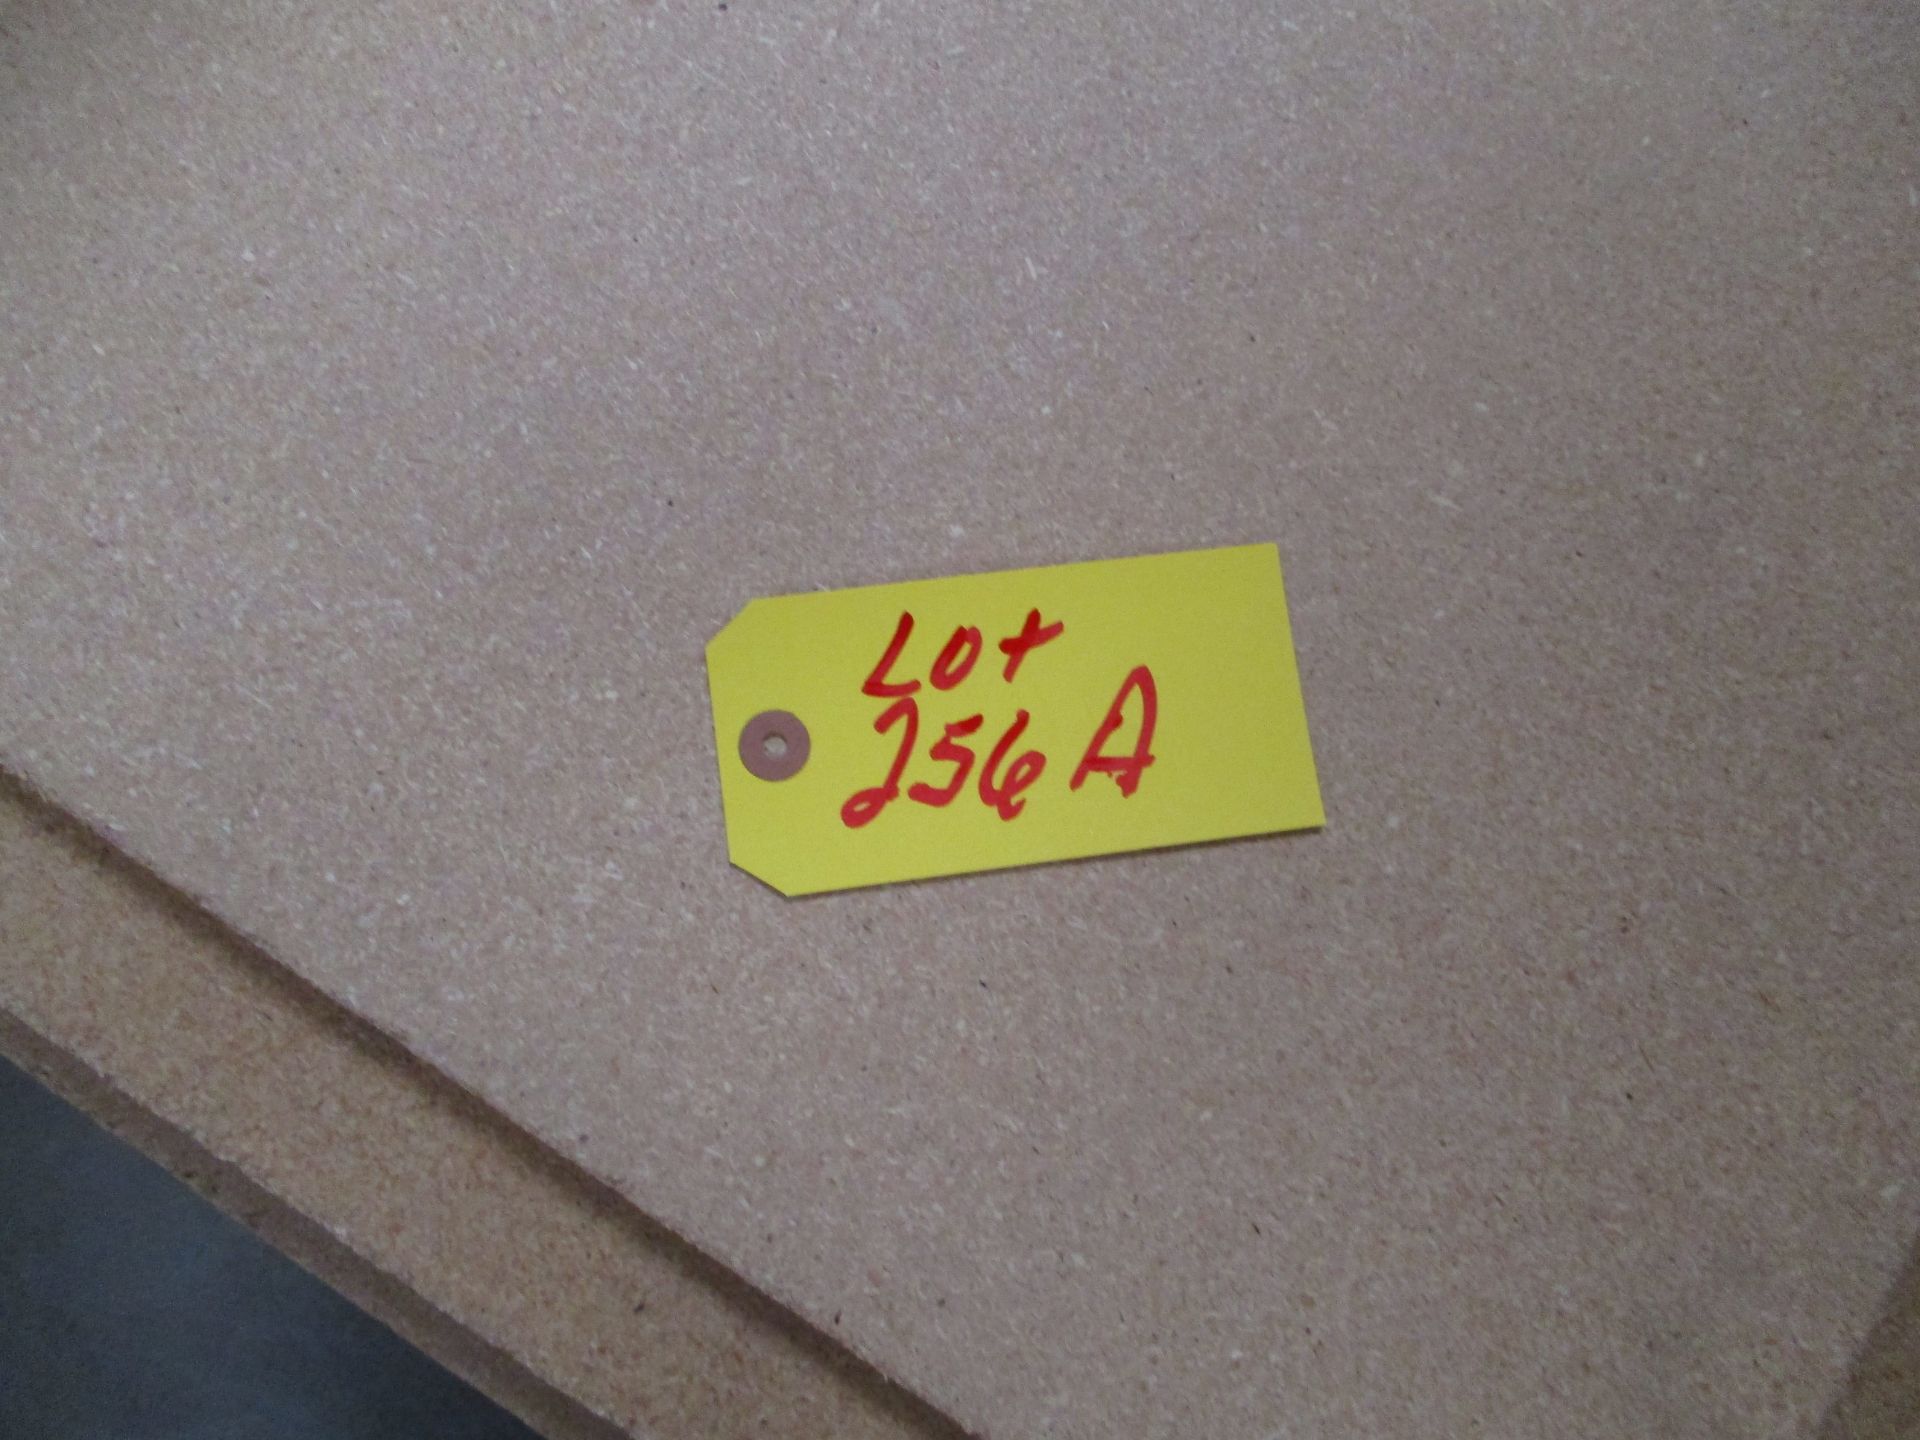 Lot 256A Large lot of Used Particle Board - Image 4 of 4